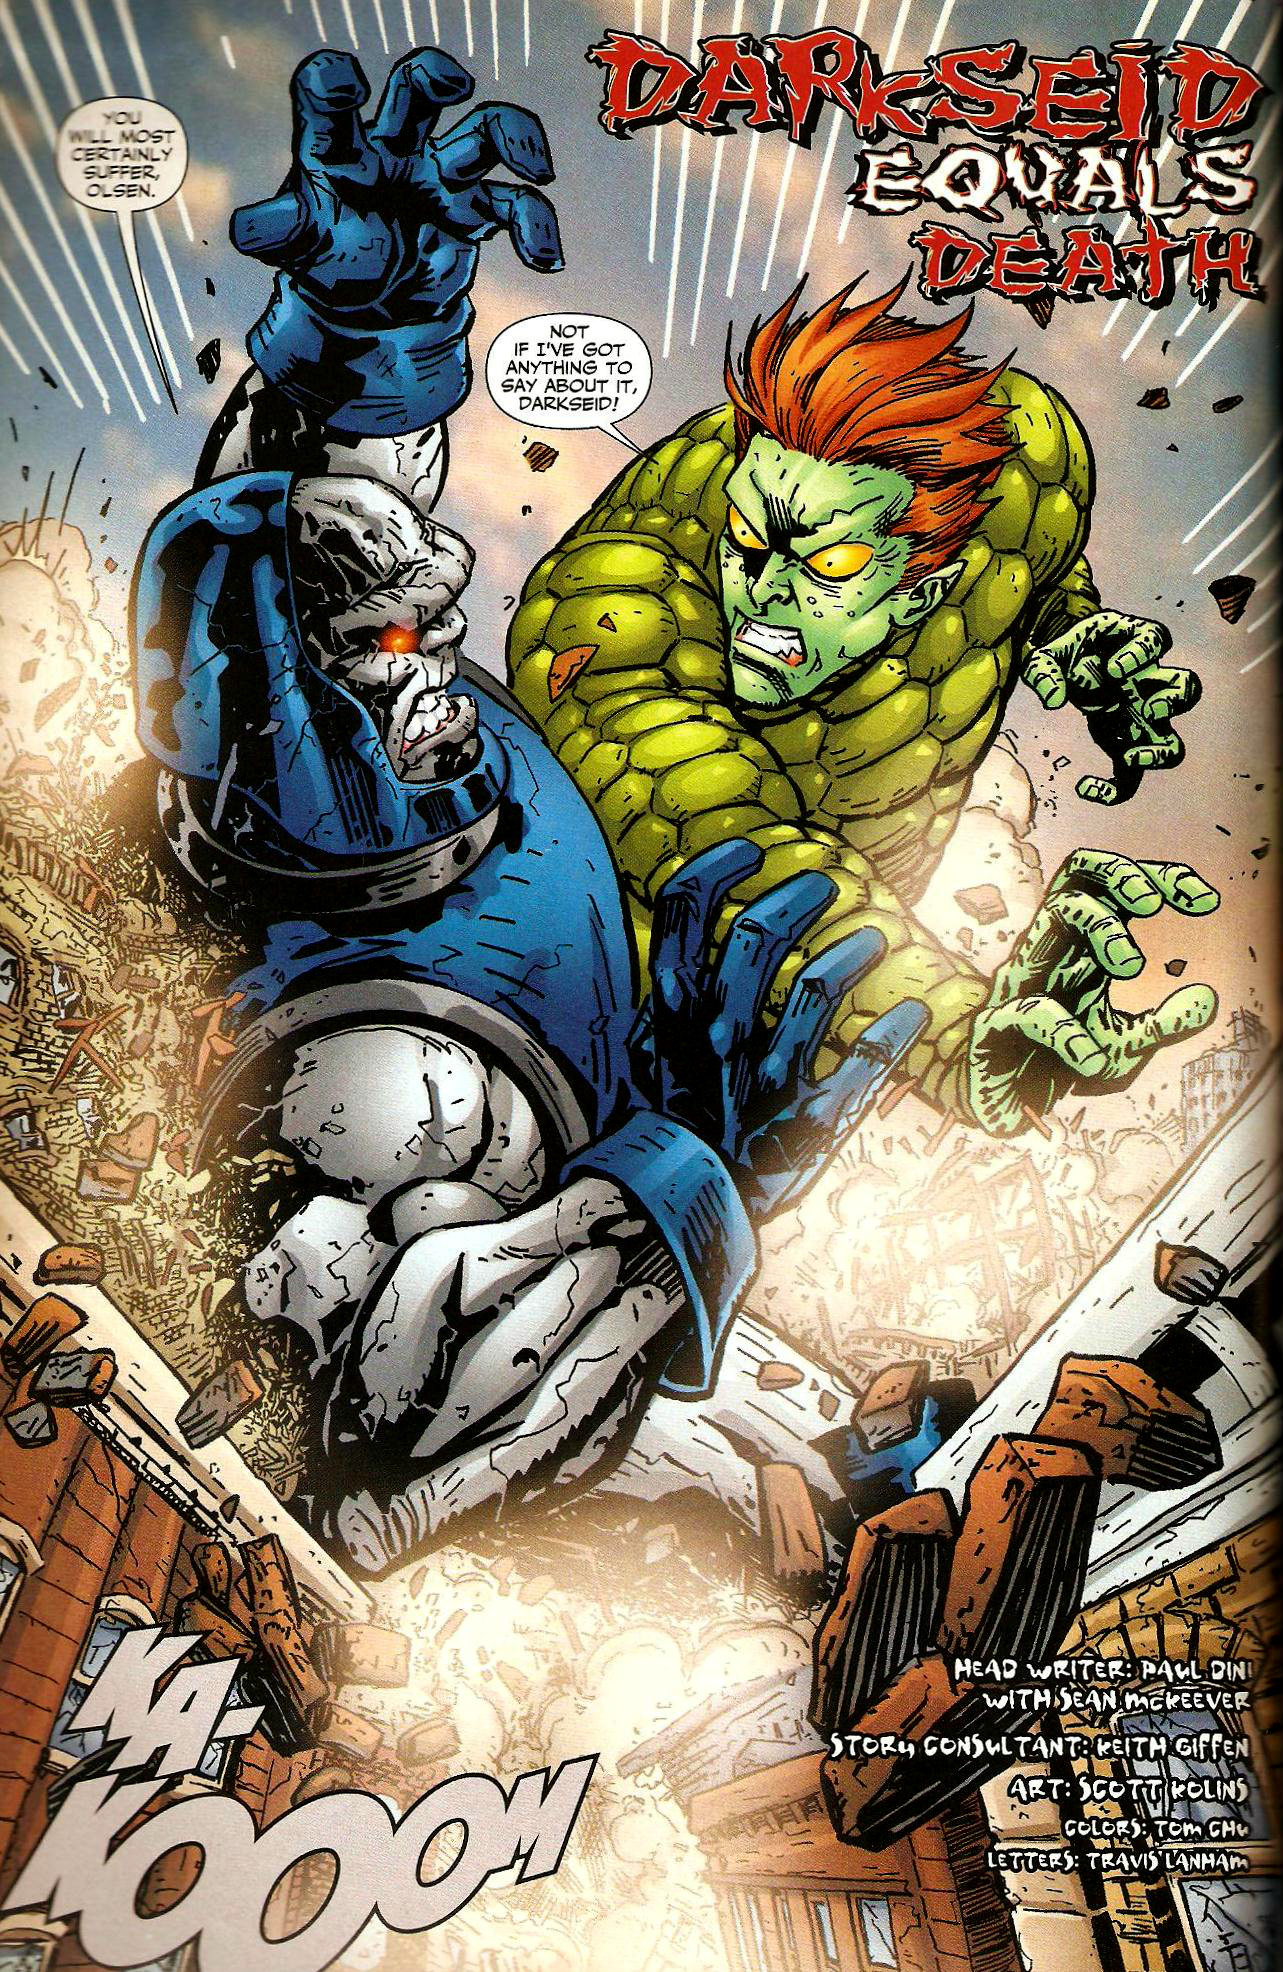 From Countdown to Final Crisis #2 (2008)